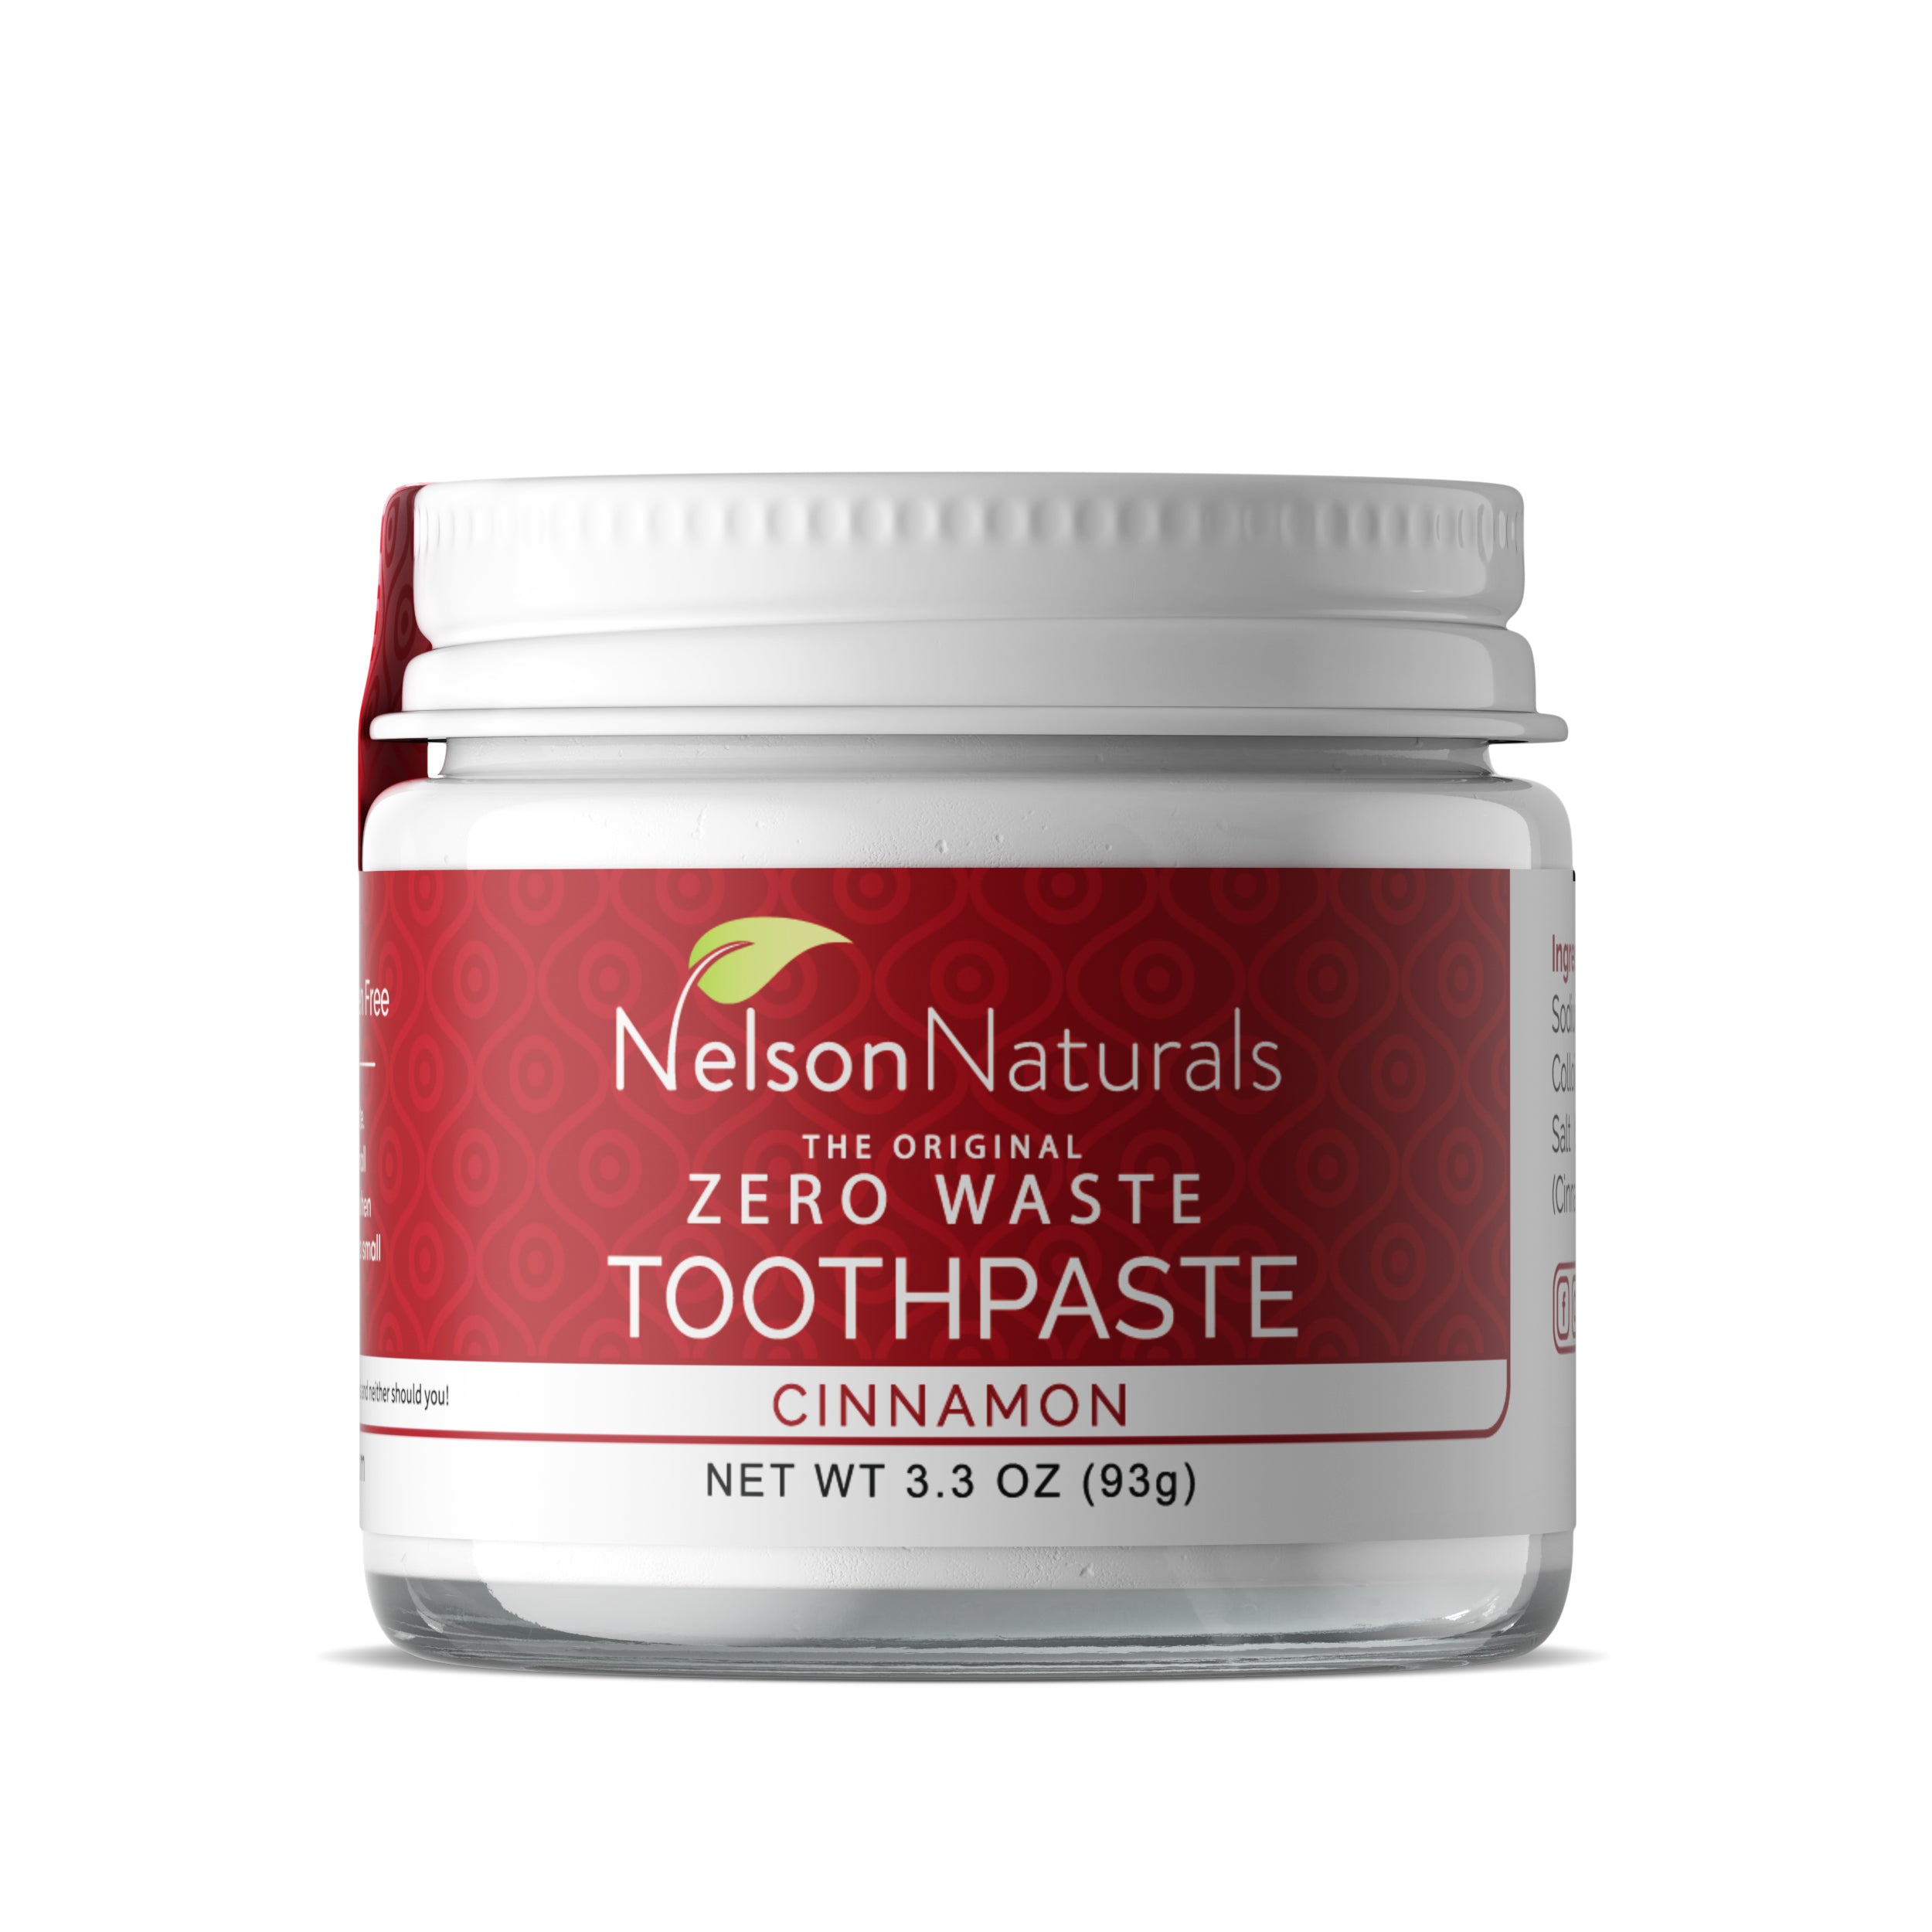 Cinnamon 93g (Limited Edition) Toothpaste - nelsonnaturals remineralizing toothpaste